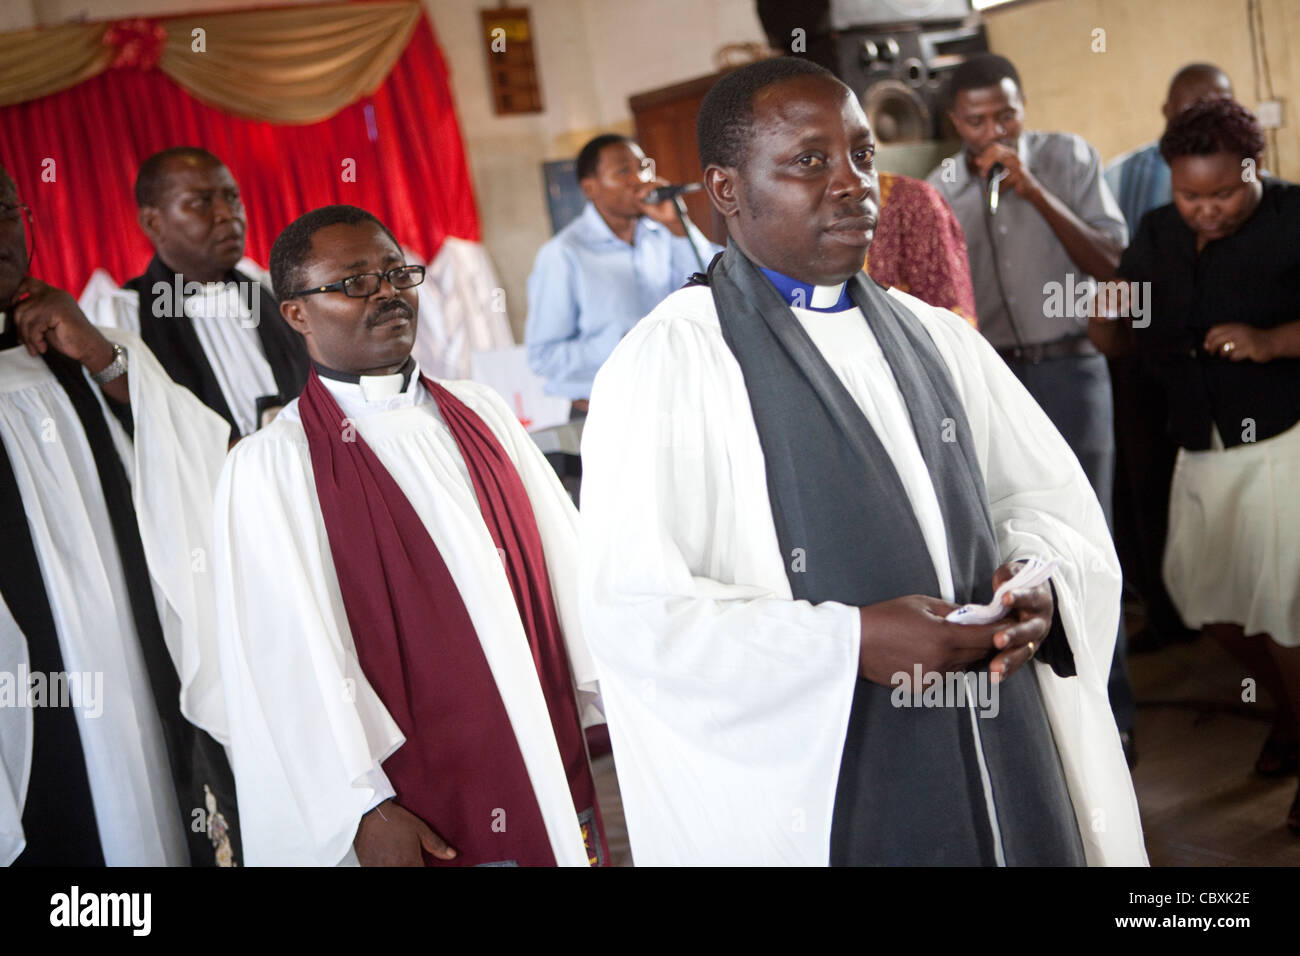 Priests move in procession during a church service in Morogoro, Tanzania, East Africa. Stock Photo